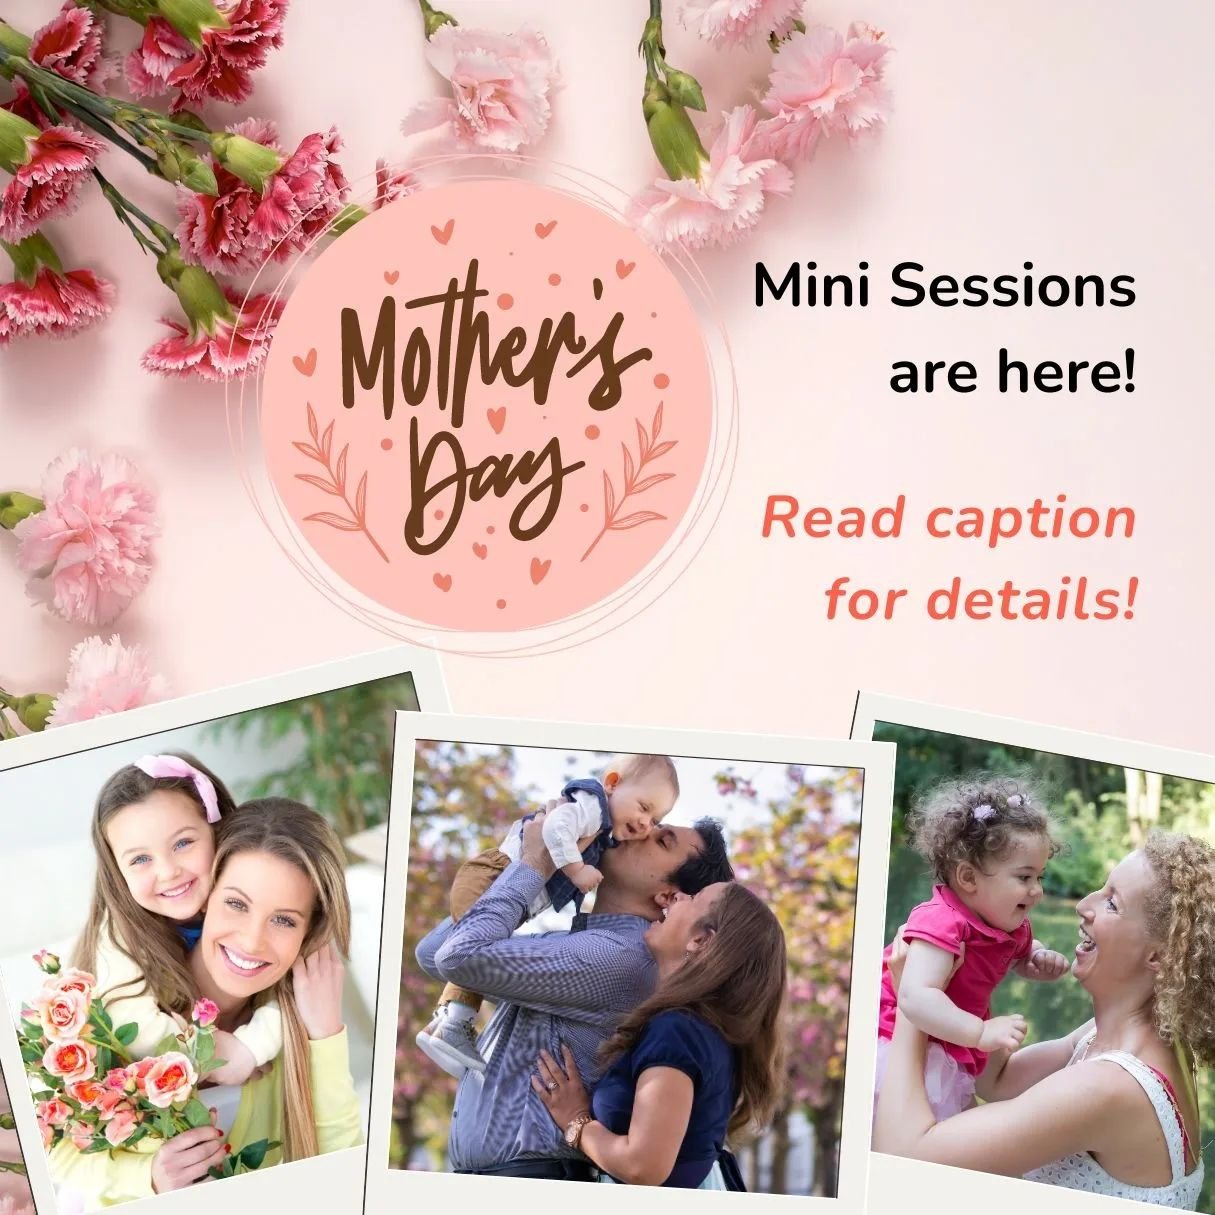 📸✨ Capture the love that speaks volumes this Mother's Day! Join me for my exclusive Mother's Day Mini Photo sessions in South Munich on May 5th.
Time slots are  available every half an hour. Reserve yours now for just &euro;125. 

Session includes 5